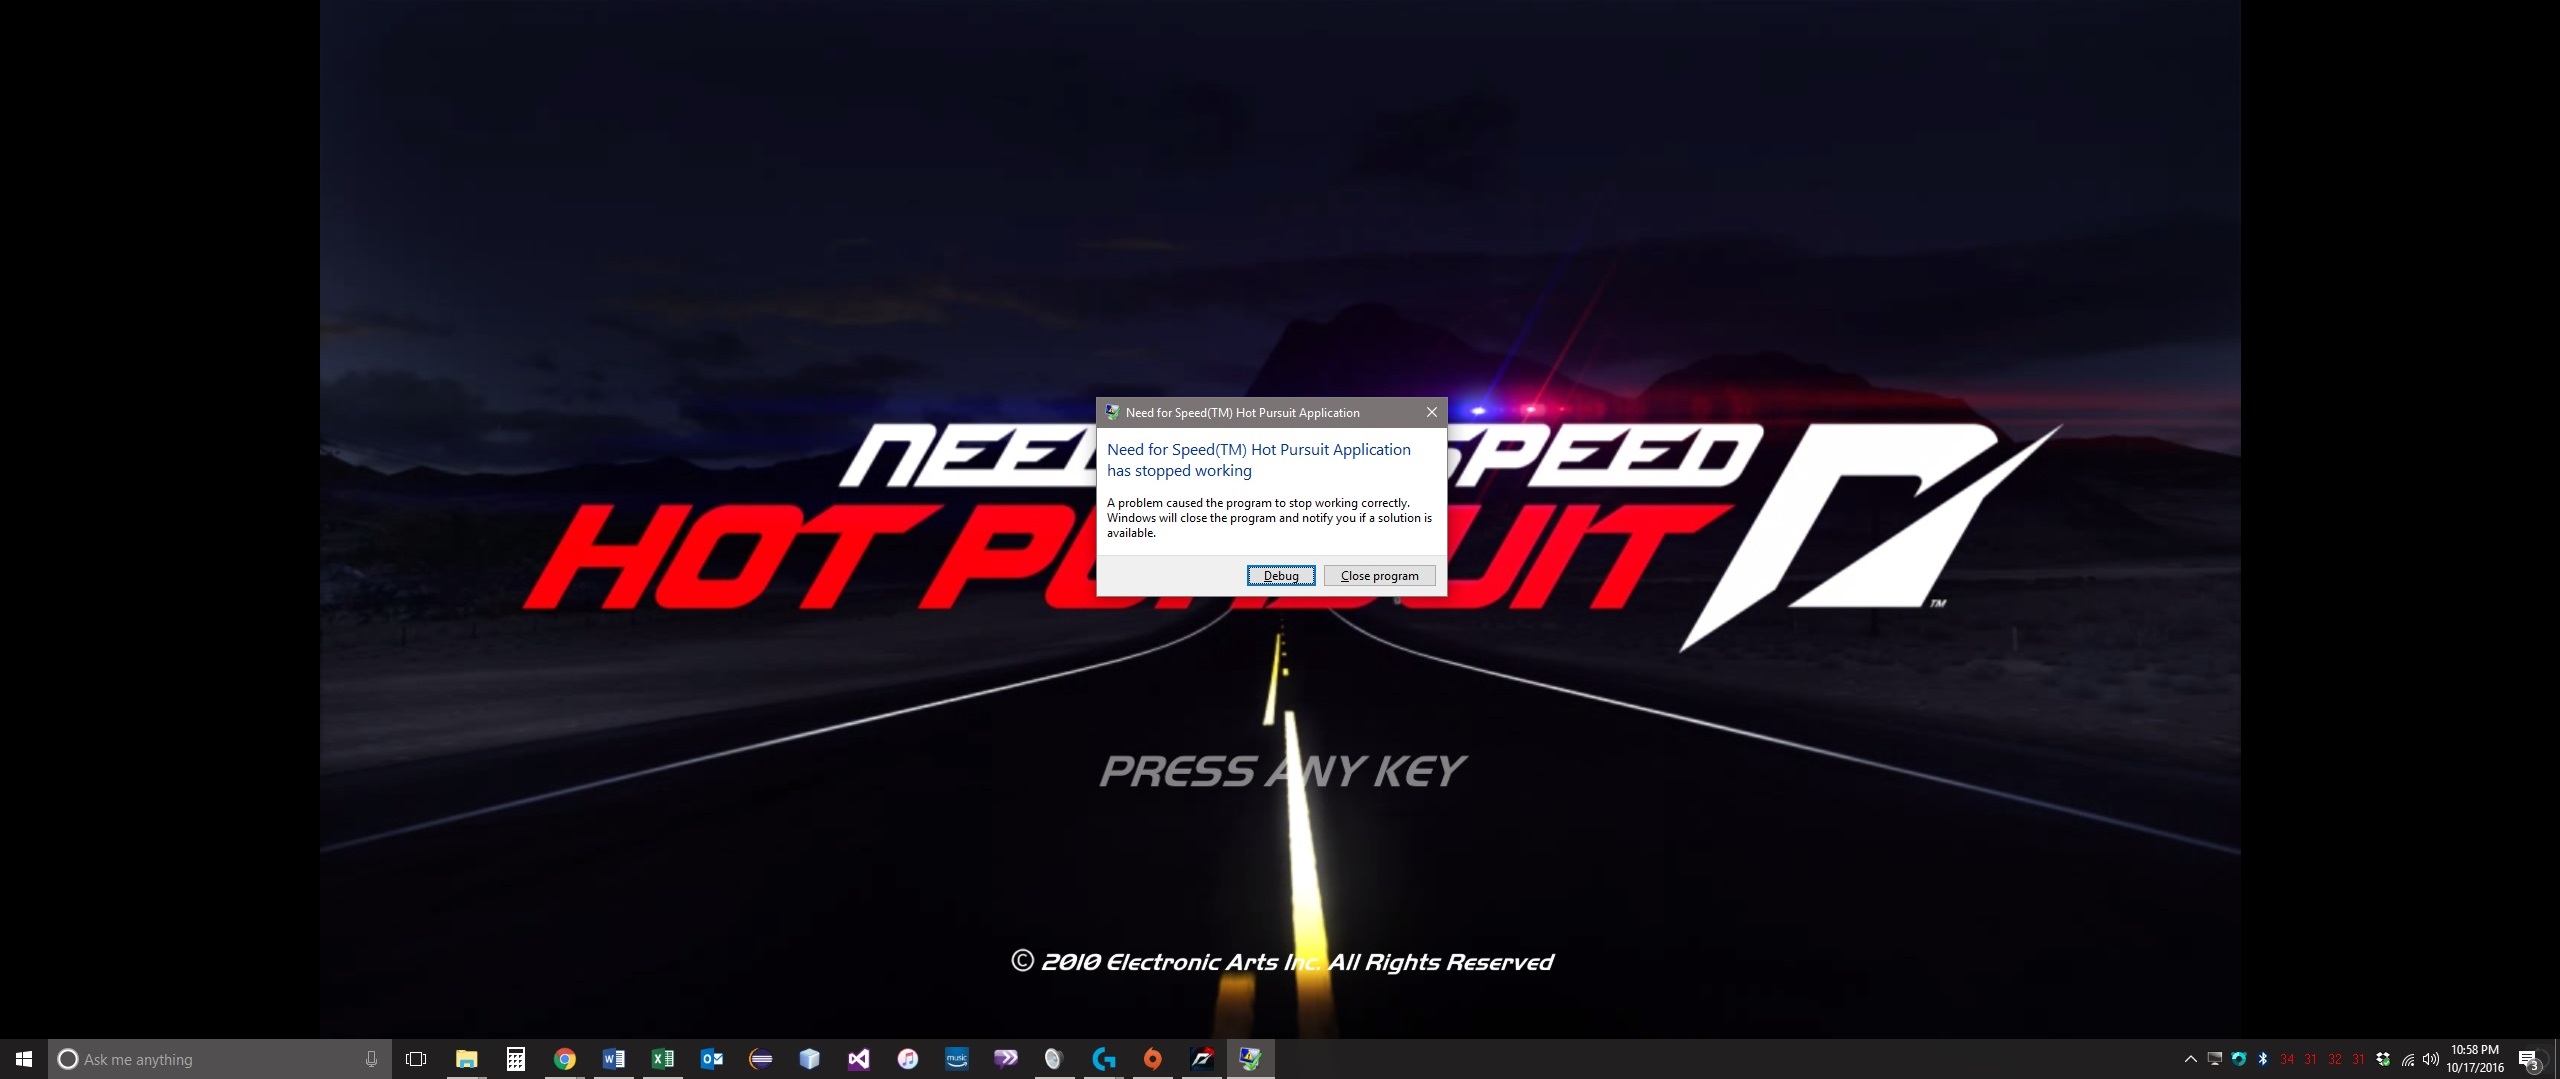 Uninstall NFS11.exe from your computer and then reinstall it from the original source or disc.
Ensure that you follow the proper installation instructions and enter any required activation codes.